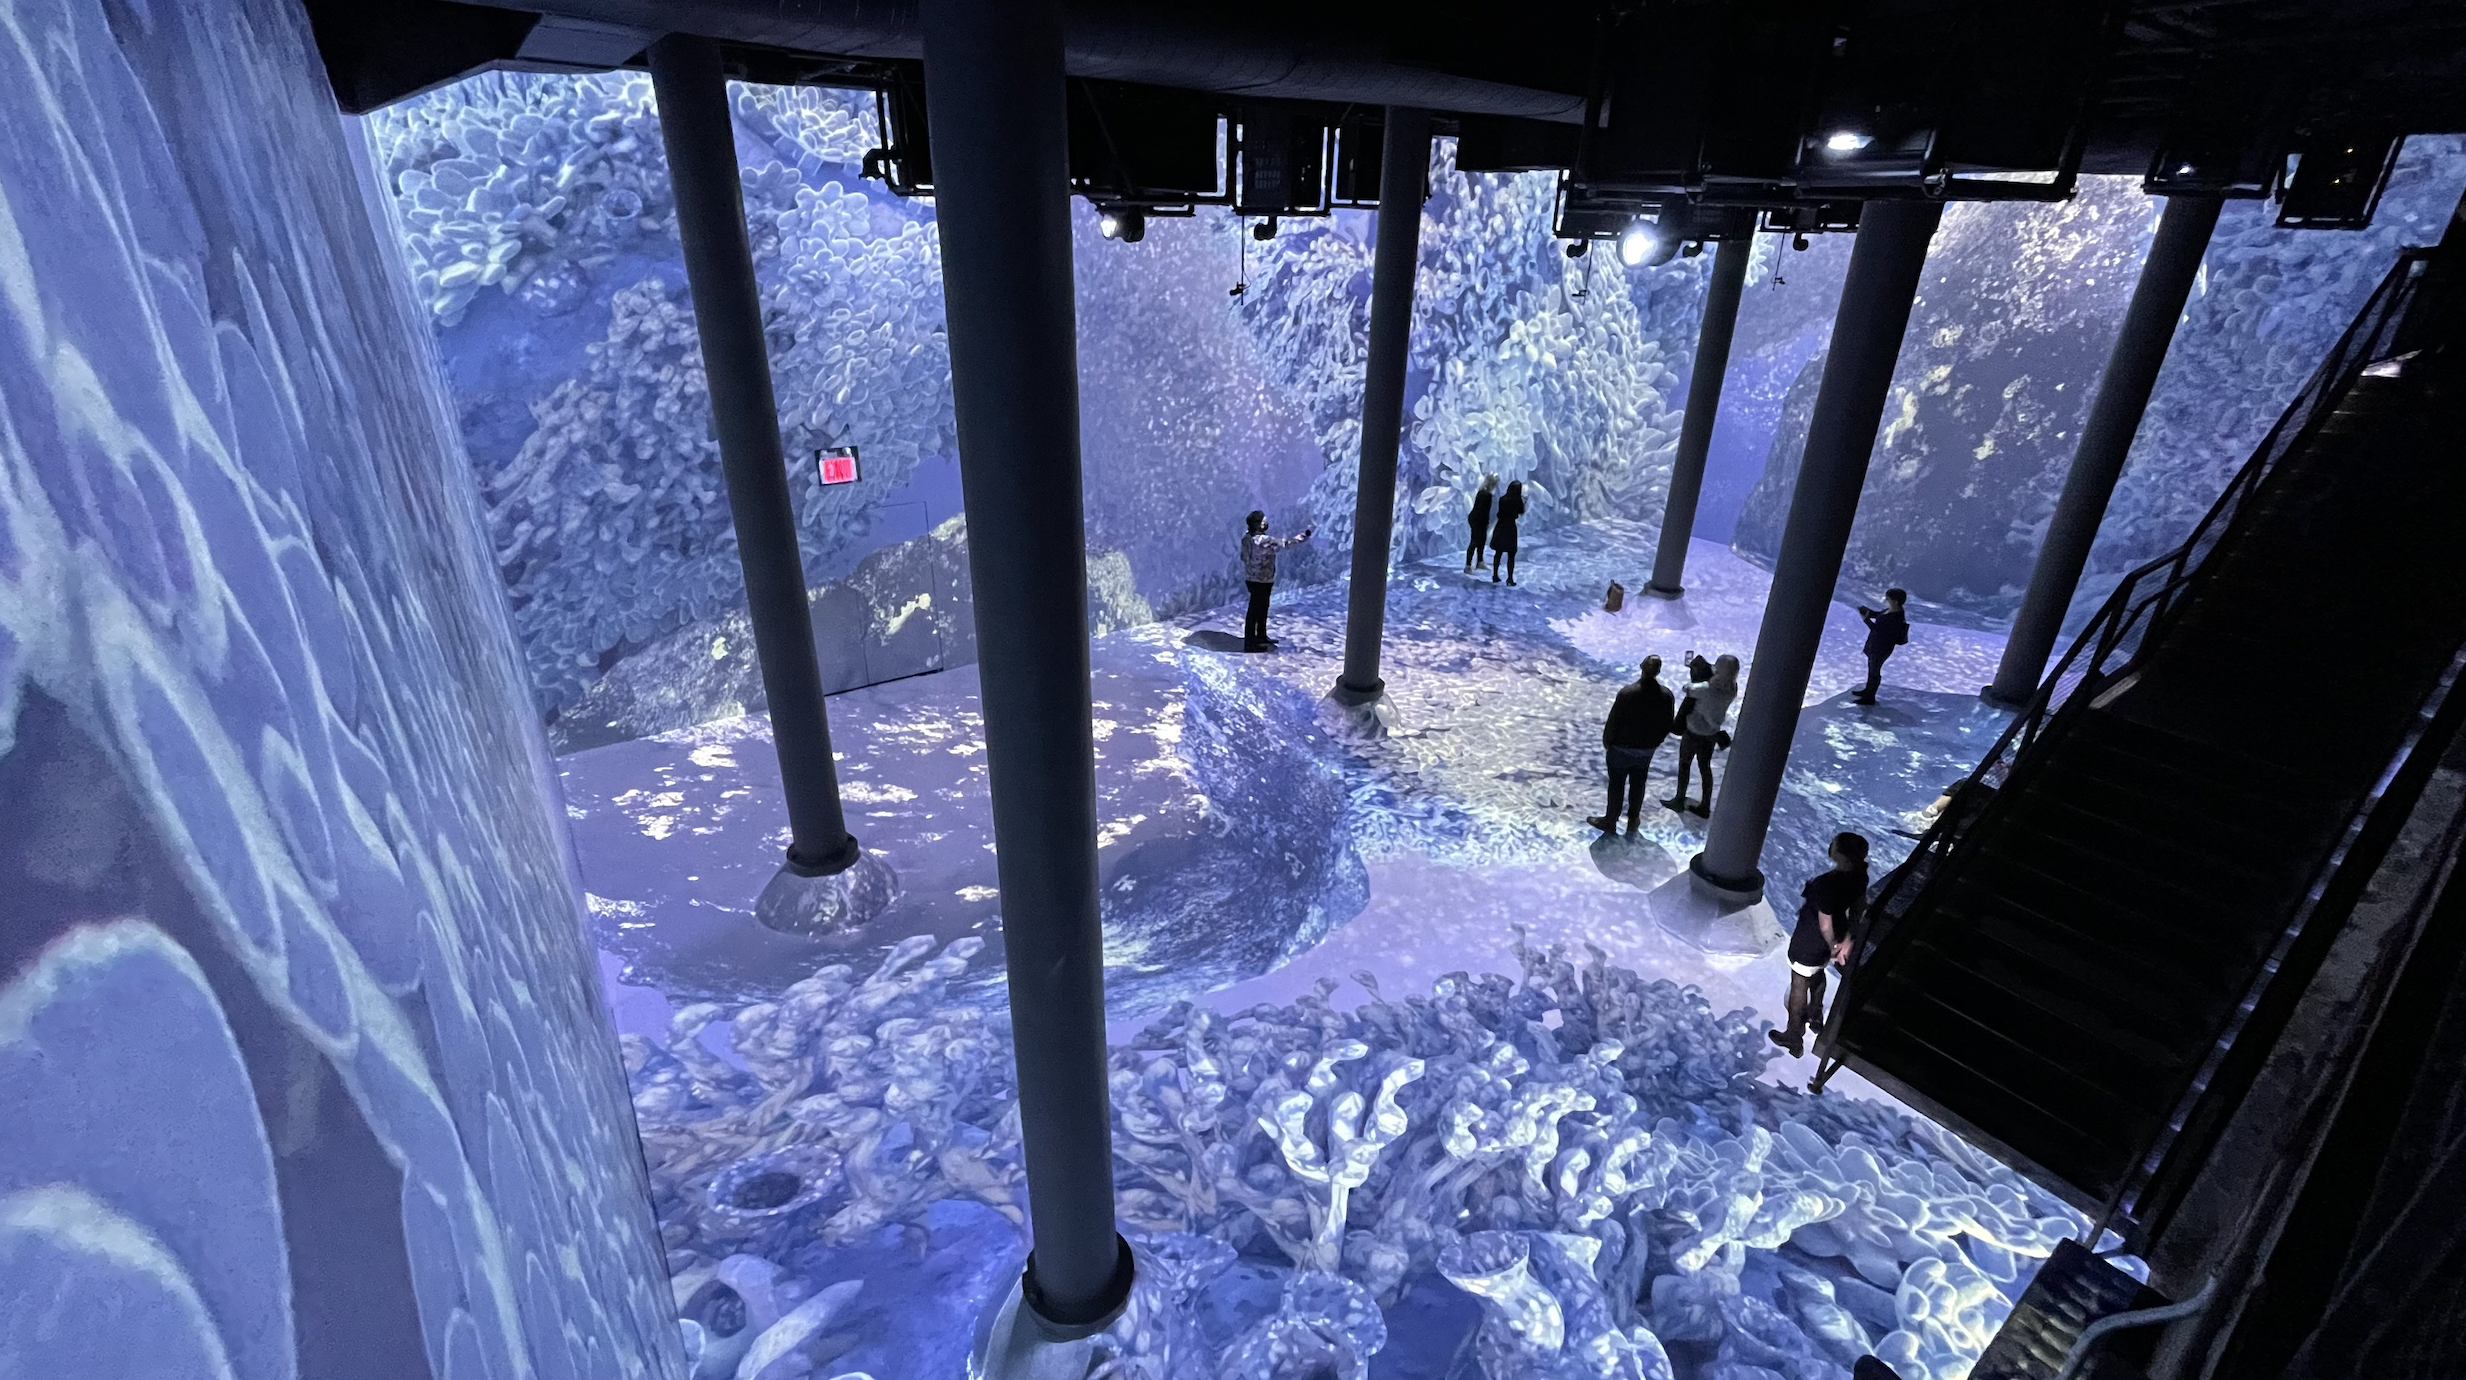 Art Exhibits, Events & Installations in NYC in April 2022